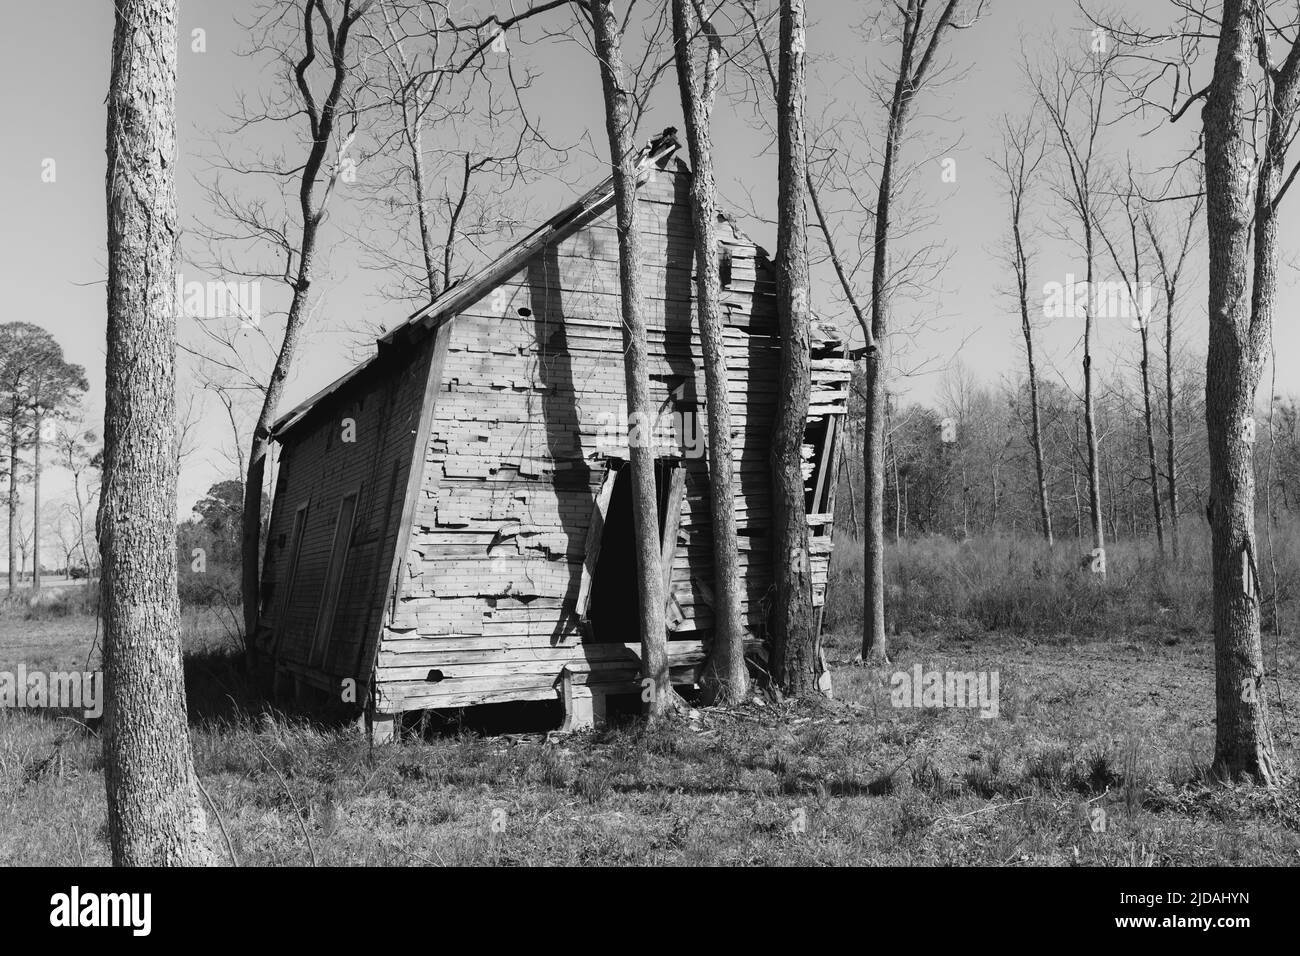 Abandoned homestead, a small log cabin, a building leaning to the side Stock Photo